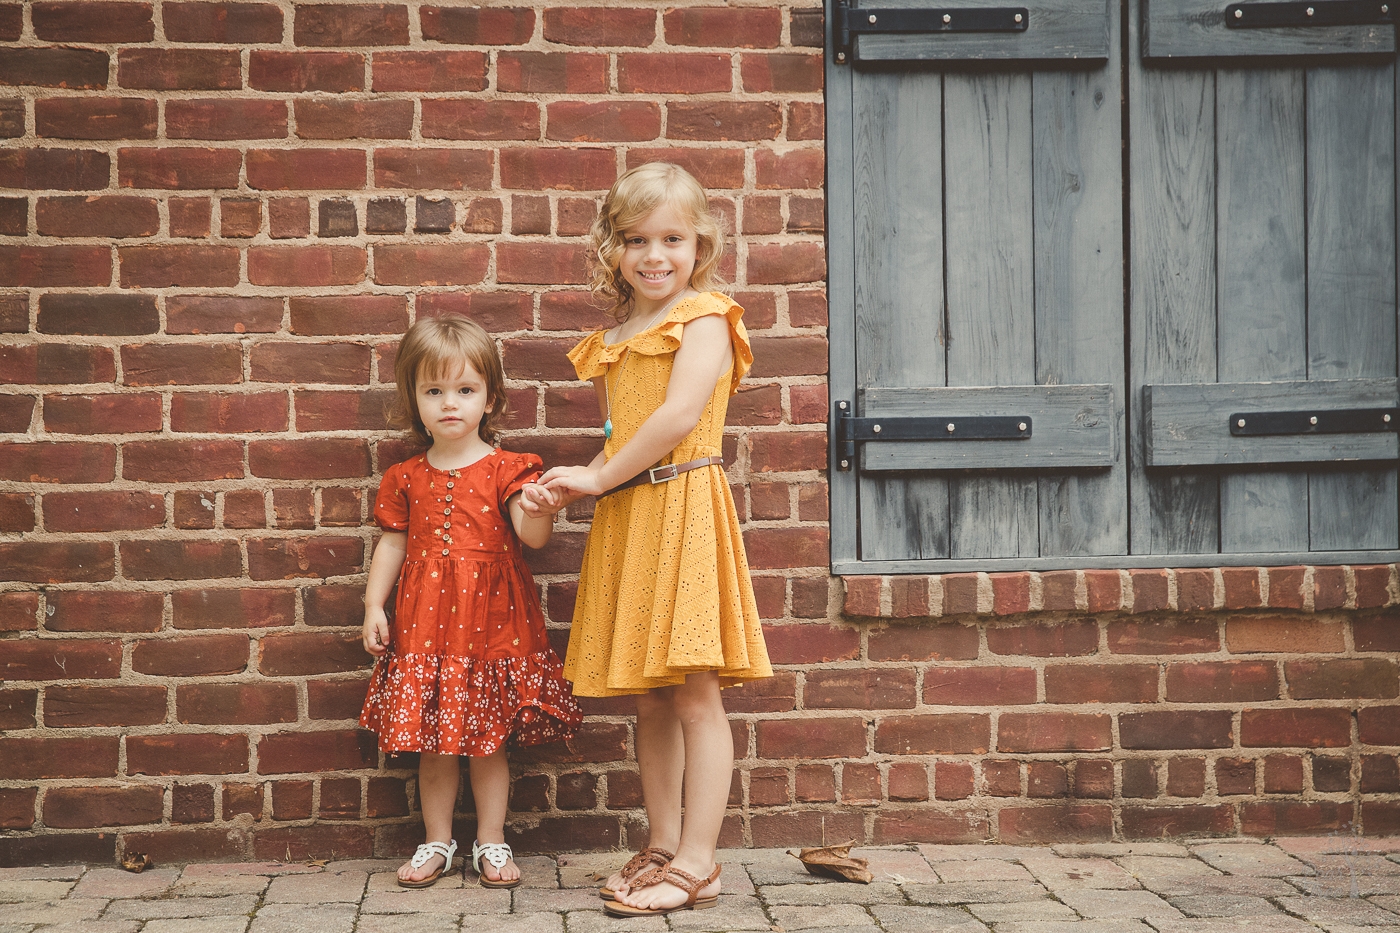 Two sisters holding hands in front of a brick building wearing dresses and smiling